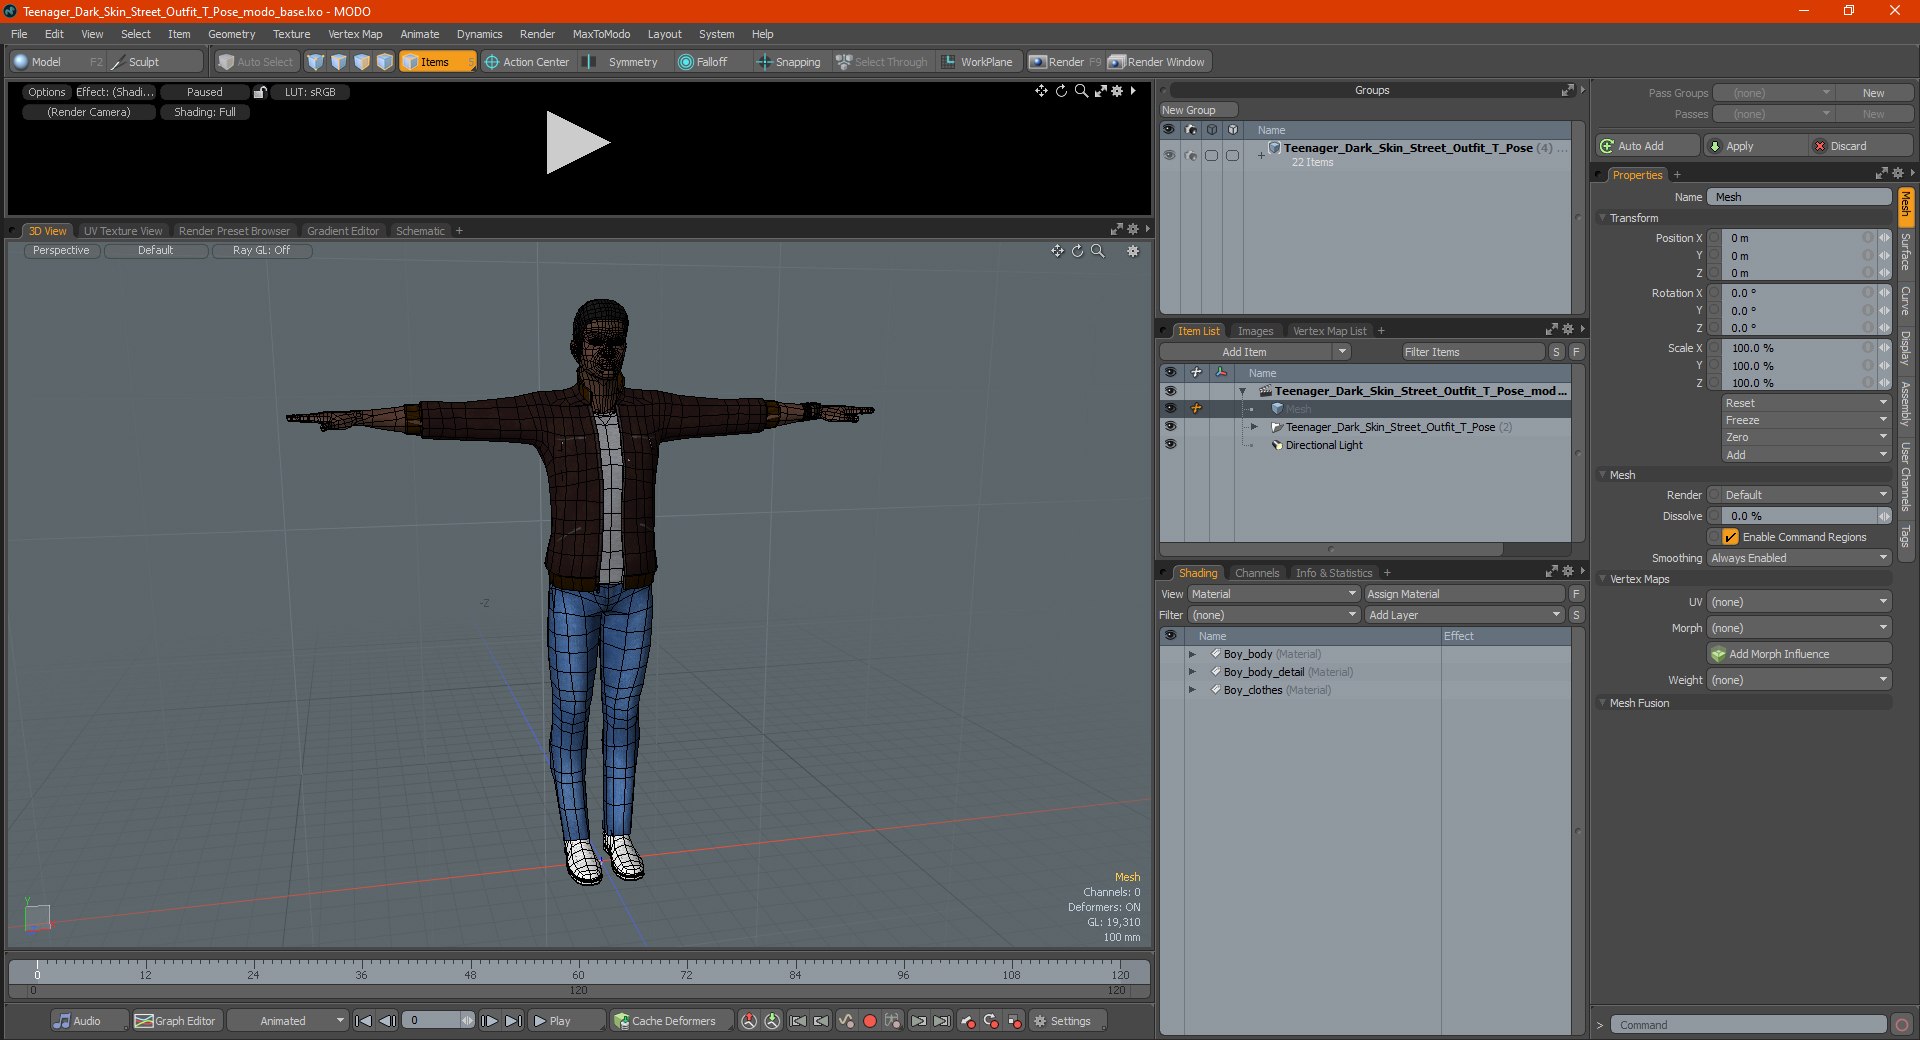 How to set up and use Bones in Curvy 3D 2.0 for posing a character